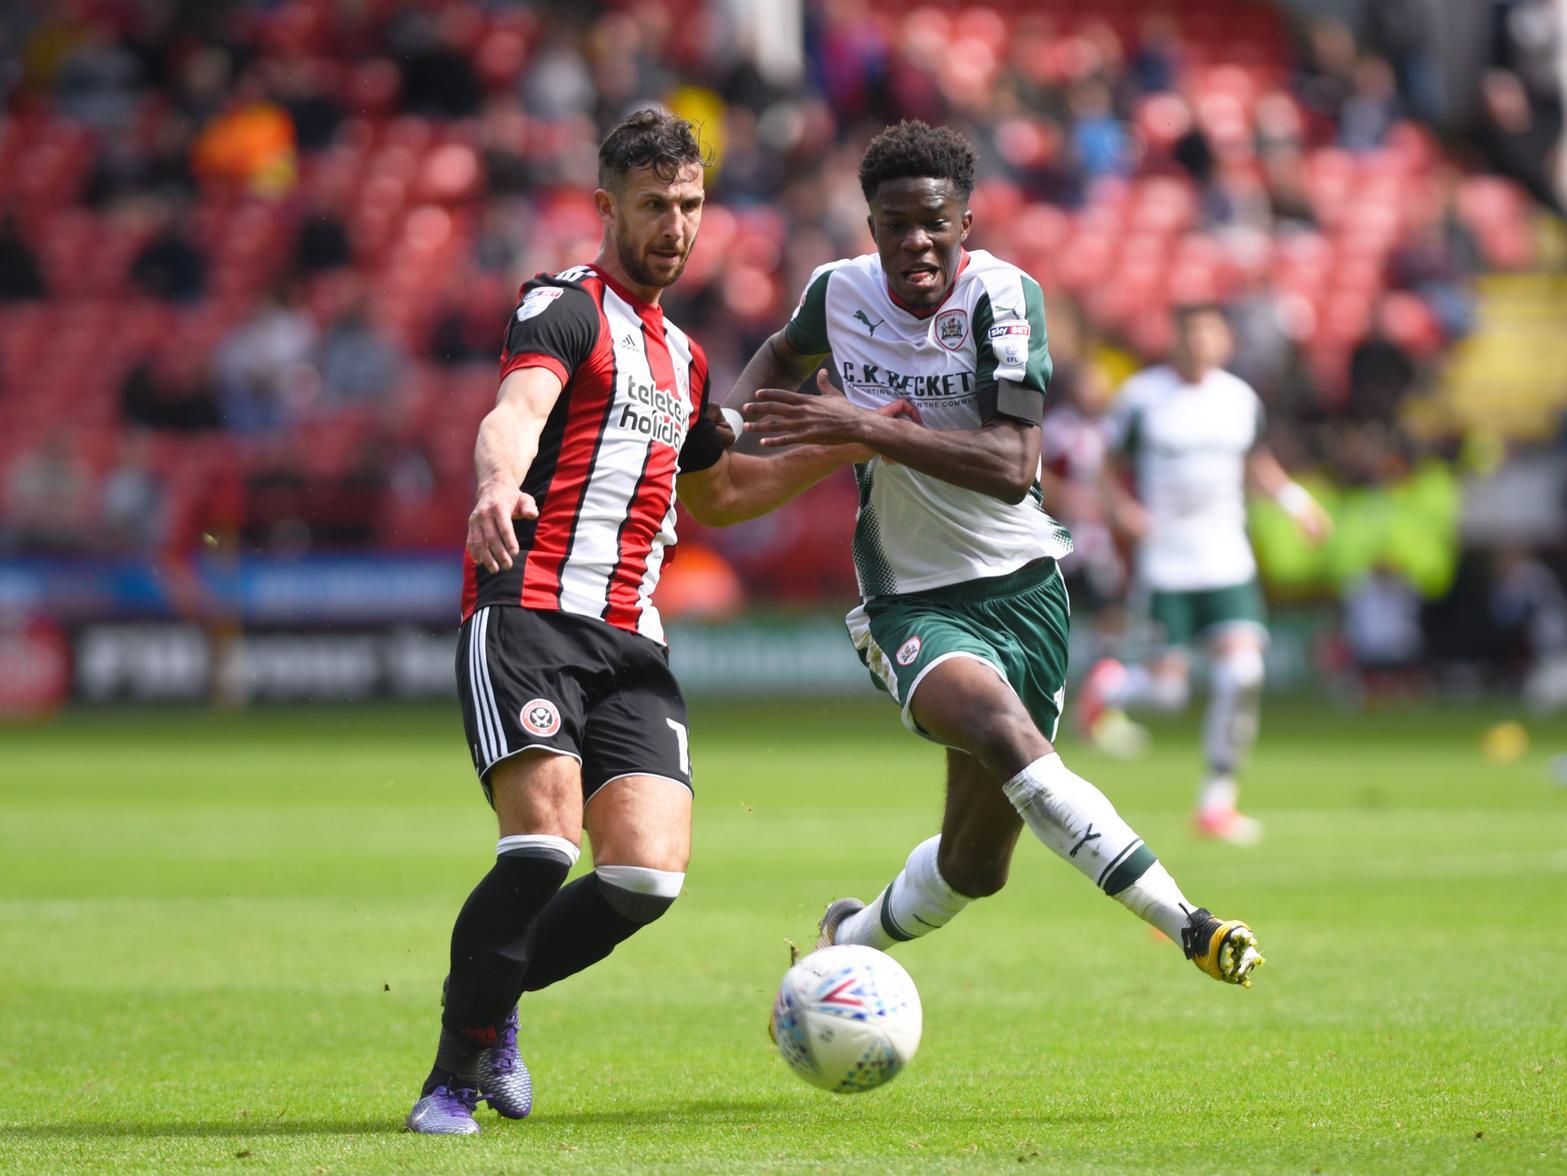 Wright, an experienced centre back, was released by Sheffield United on Deadline Day. Oxford fans were calling for Karl Robinson to bring him back to the Kassam Stadium, and a third-tier move could well be on the cards.